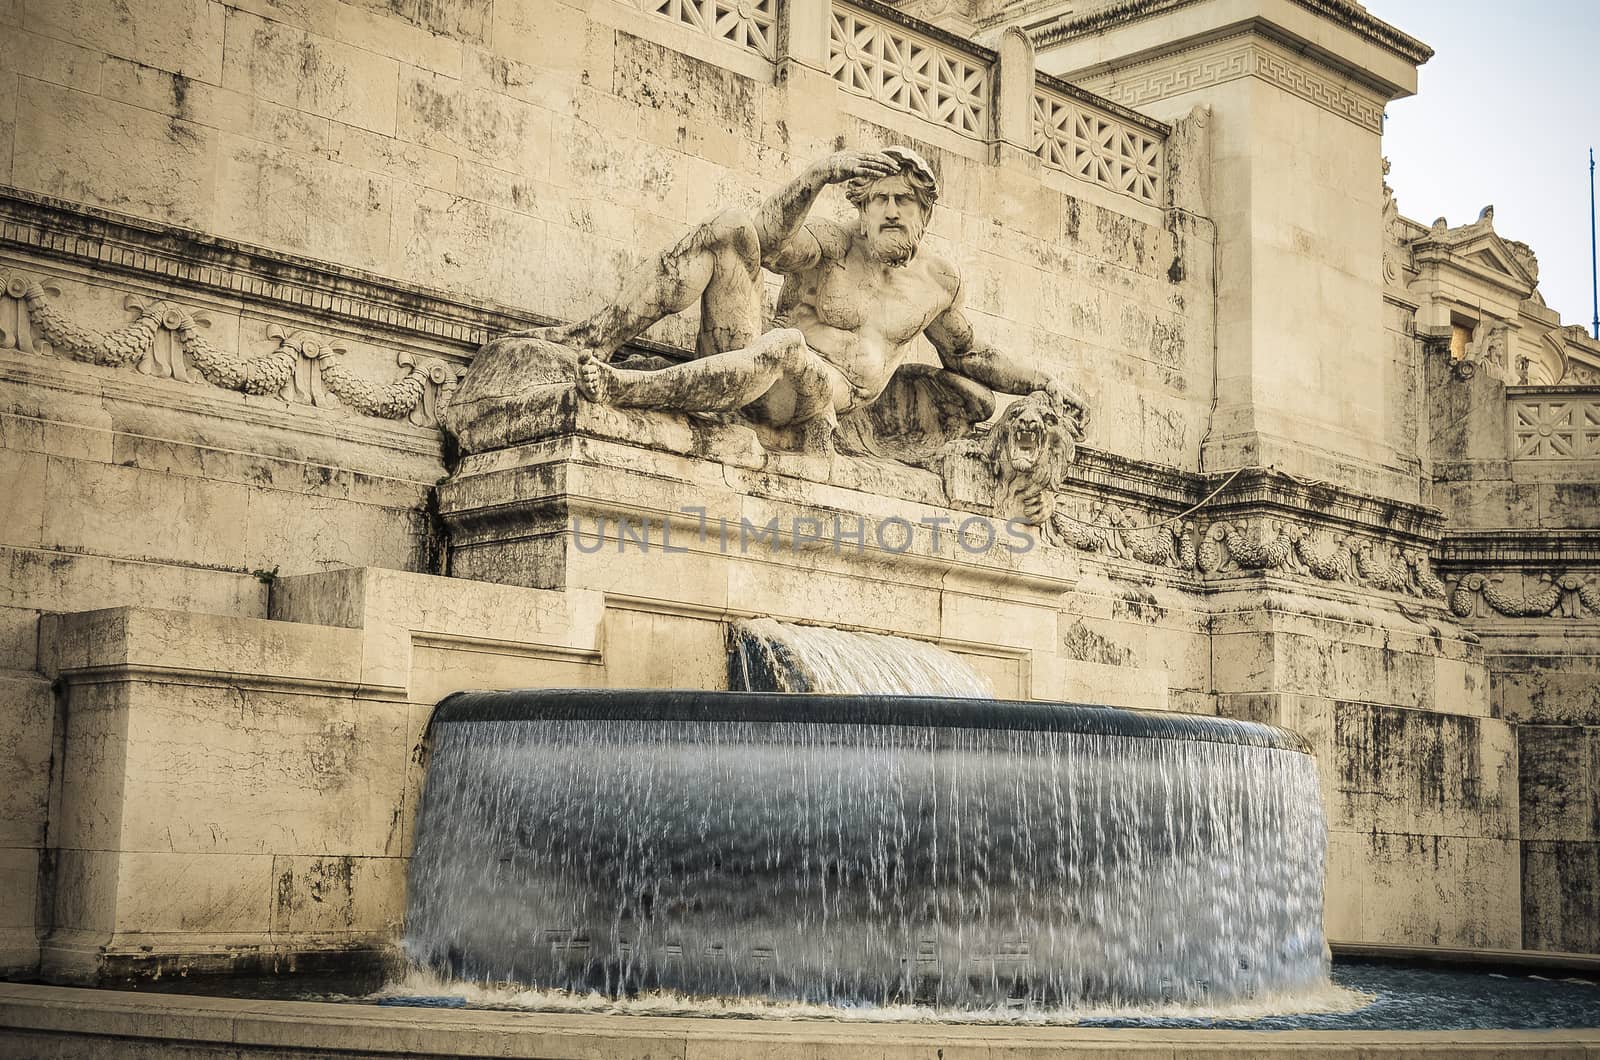 Fontana Dell'adriatico fountain out the front of the Vittorio Emanuele II Monument in Rome, Italy